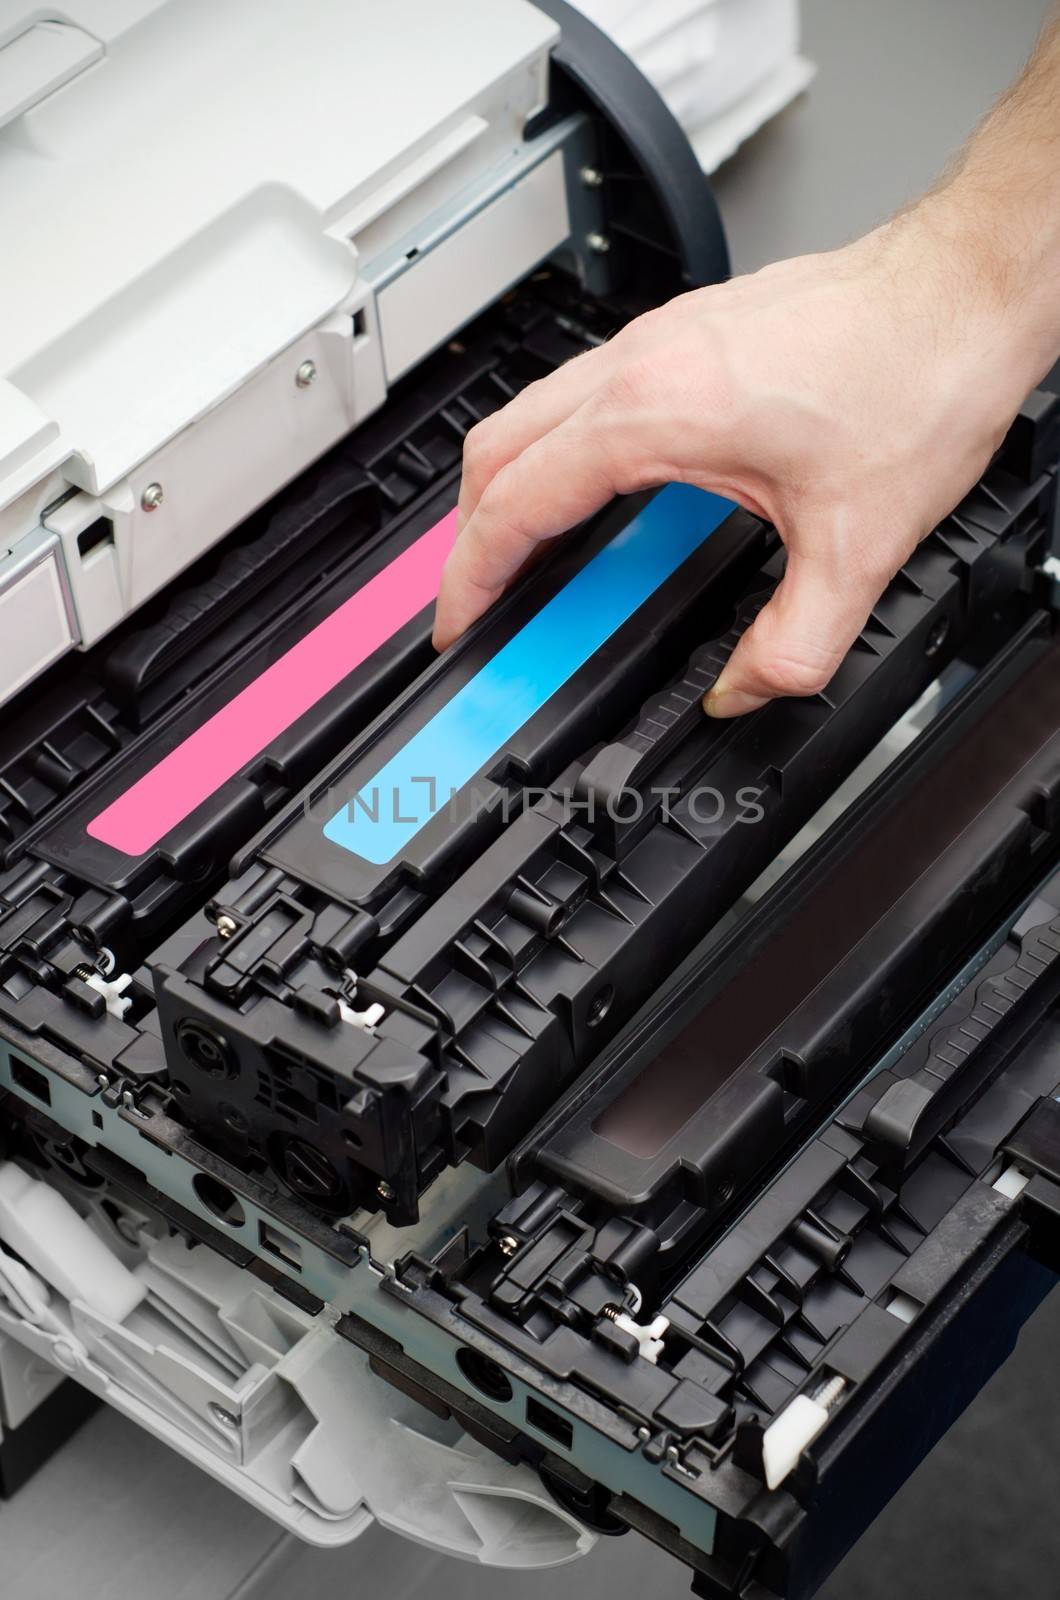 Man puts toner in the printer by simpson33